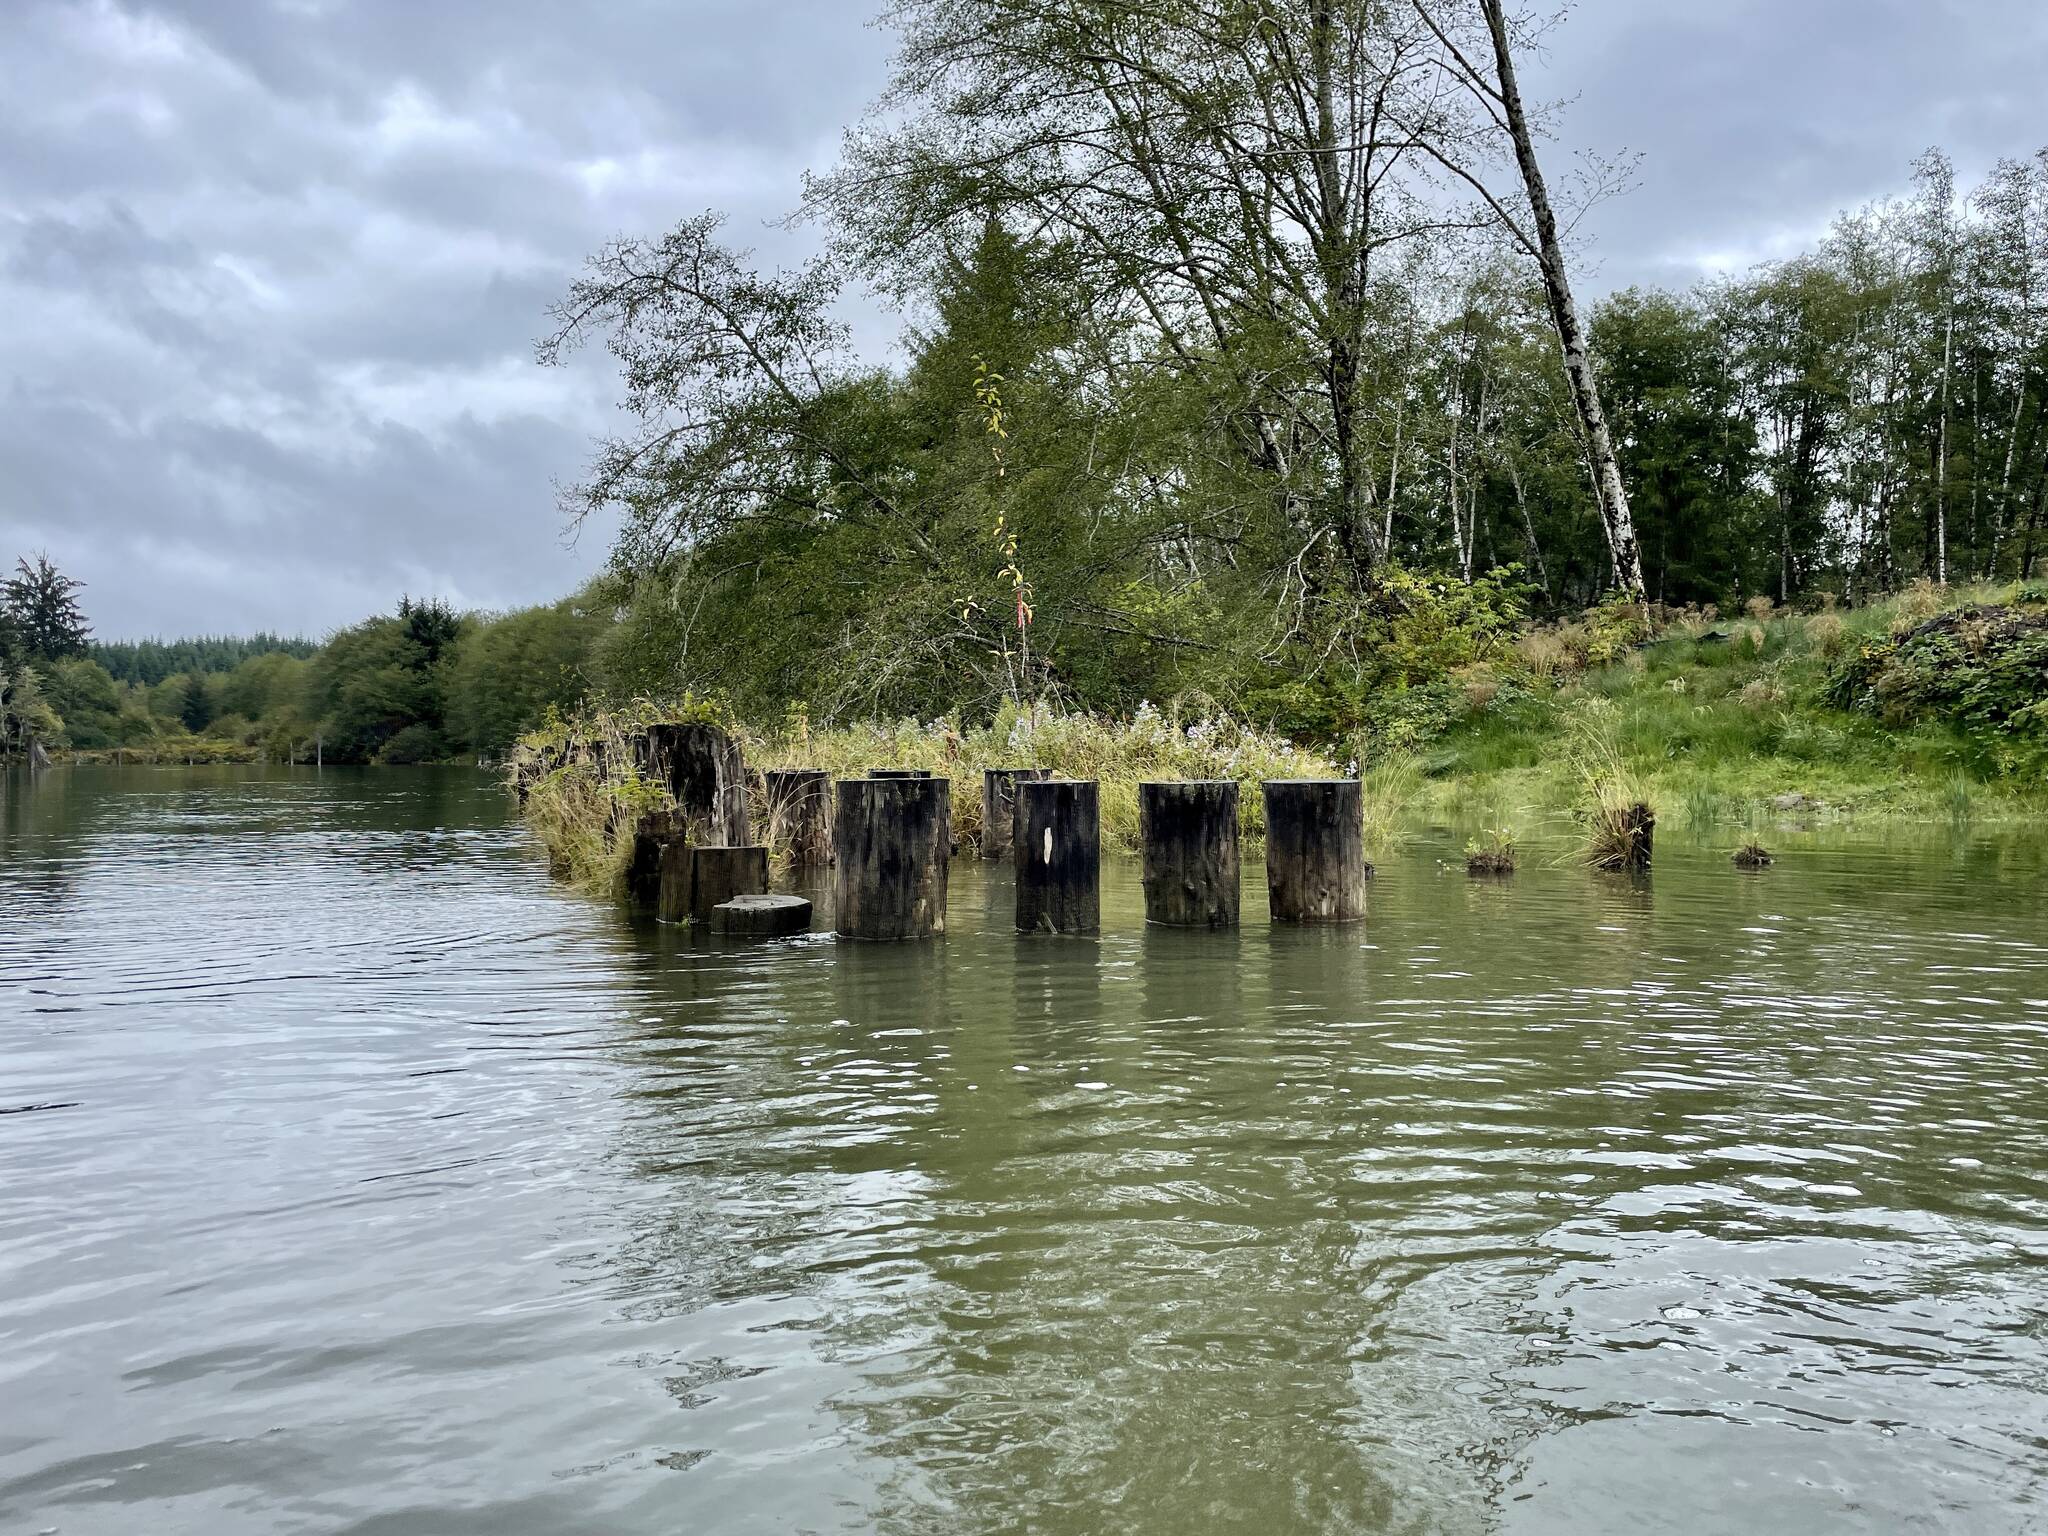 Pilings, like the 703 that needed to be removed to reopen the waterway, are visible up and down the Hoquiam River. (Michael S. Lockett / The Daily World)